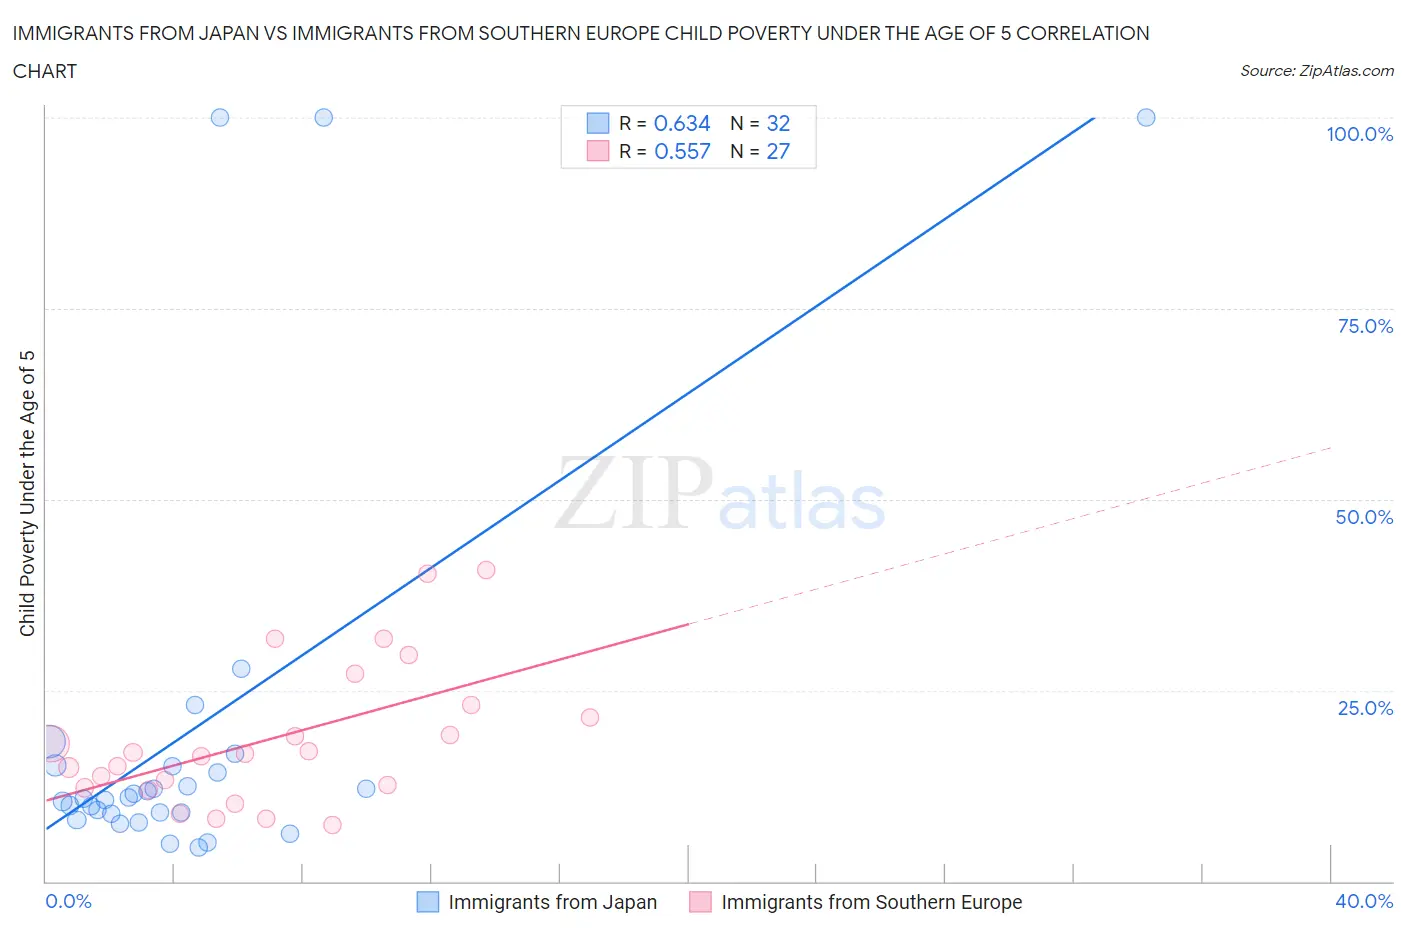 Immigrants from Japan vs Immigrants from Southern Europe Child Poverty Under the Age of 5